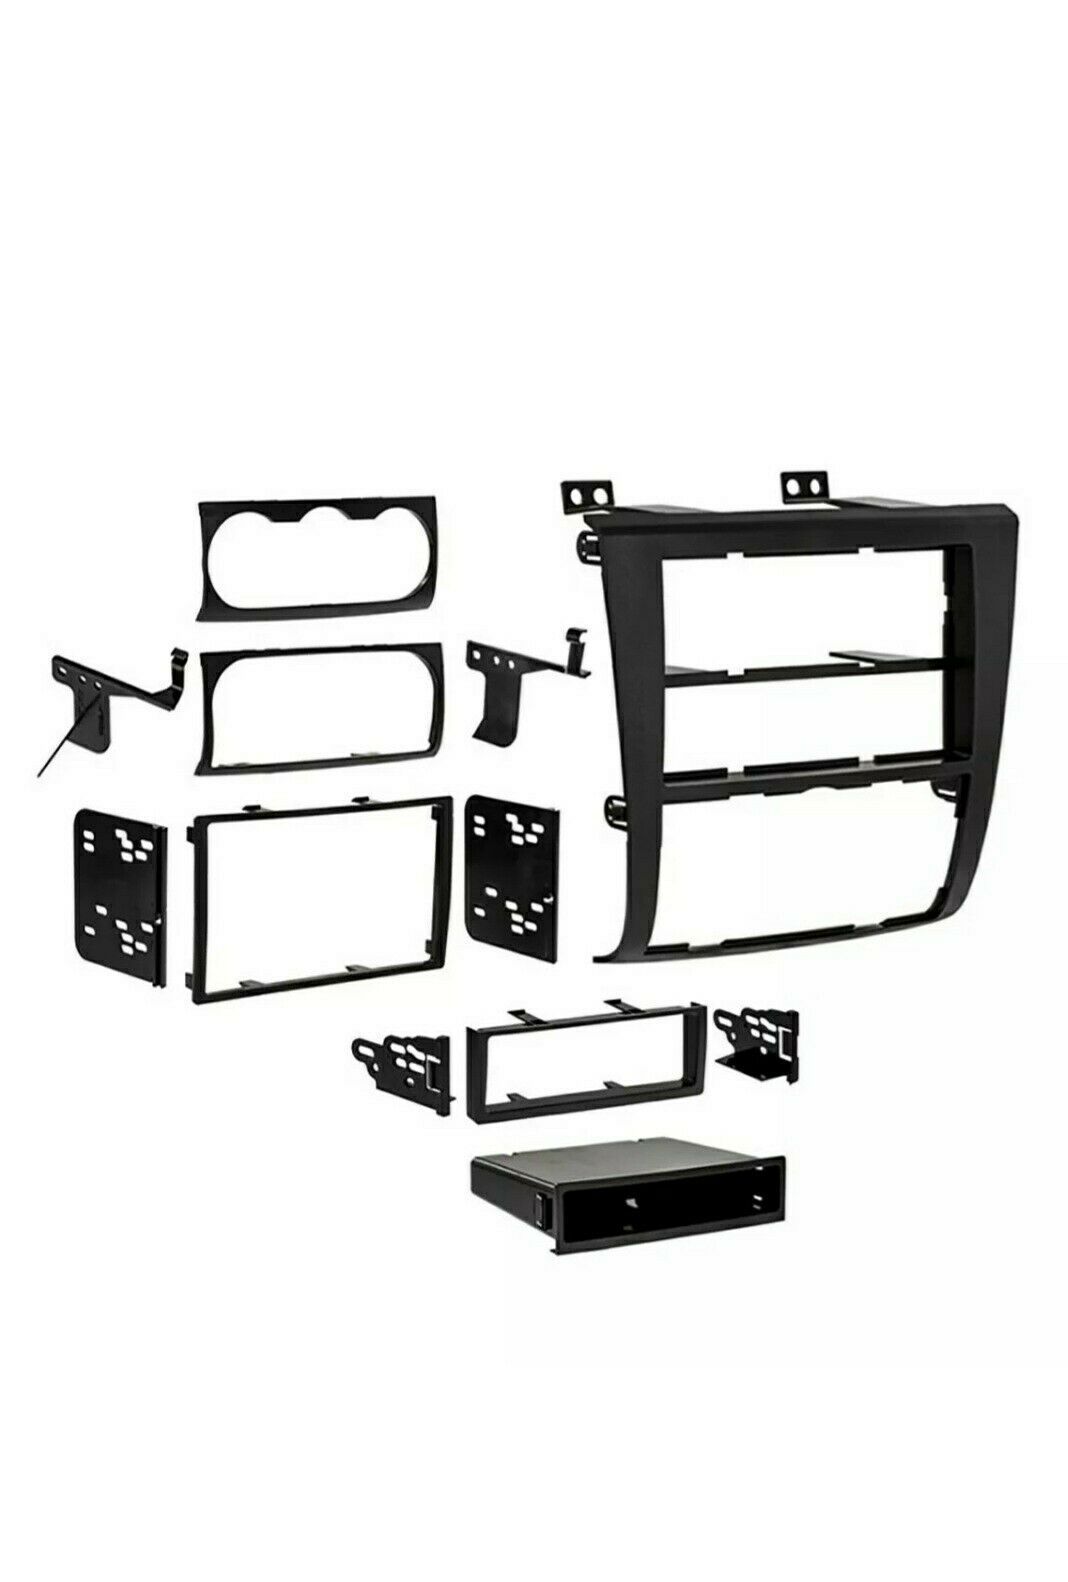 Car Stereo Single Double Din Metra Install Dash Kit for 2007-2013 Nissan Altima - $25.23